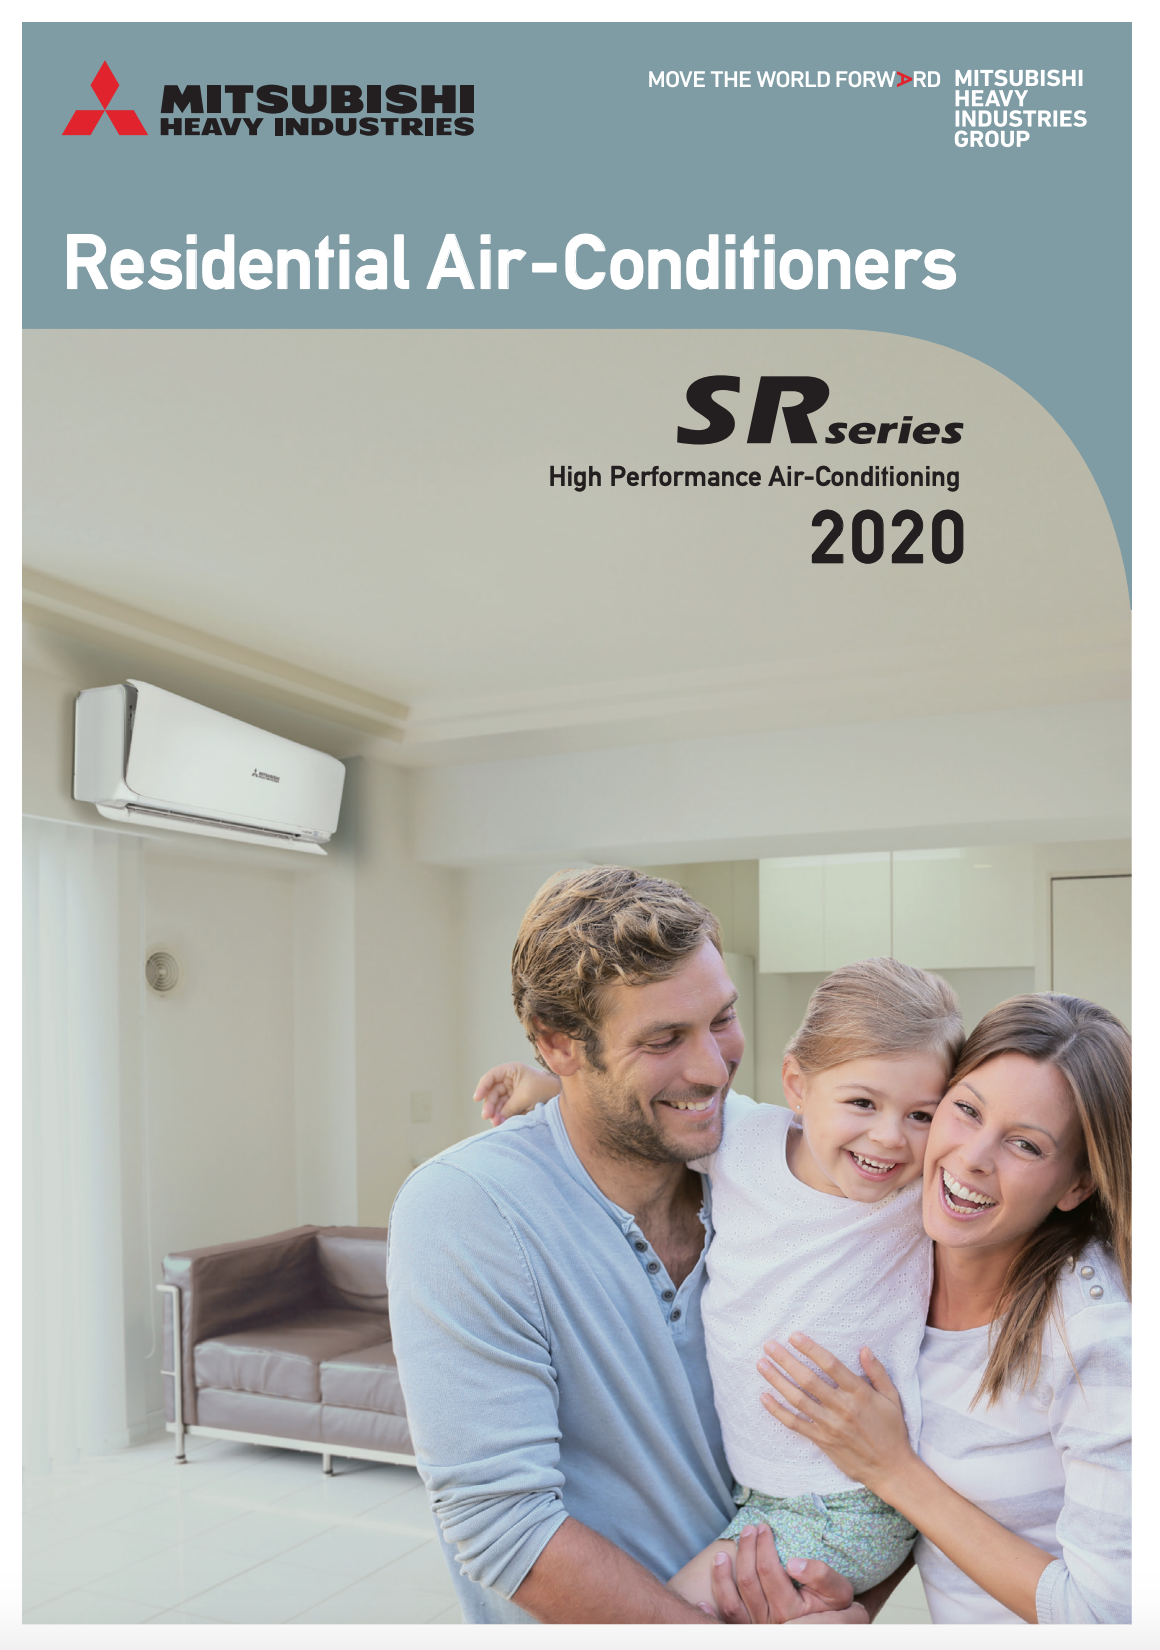 SR Series Residential Air-Conditioners 2020